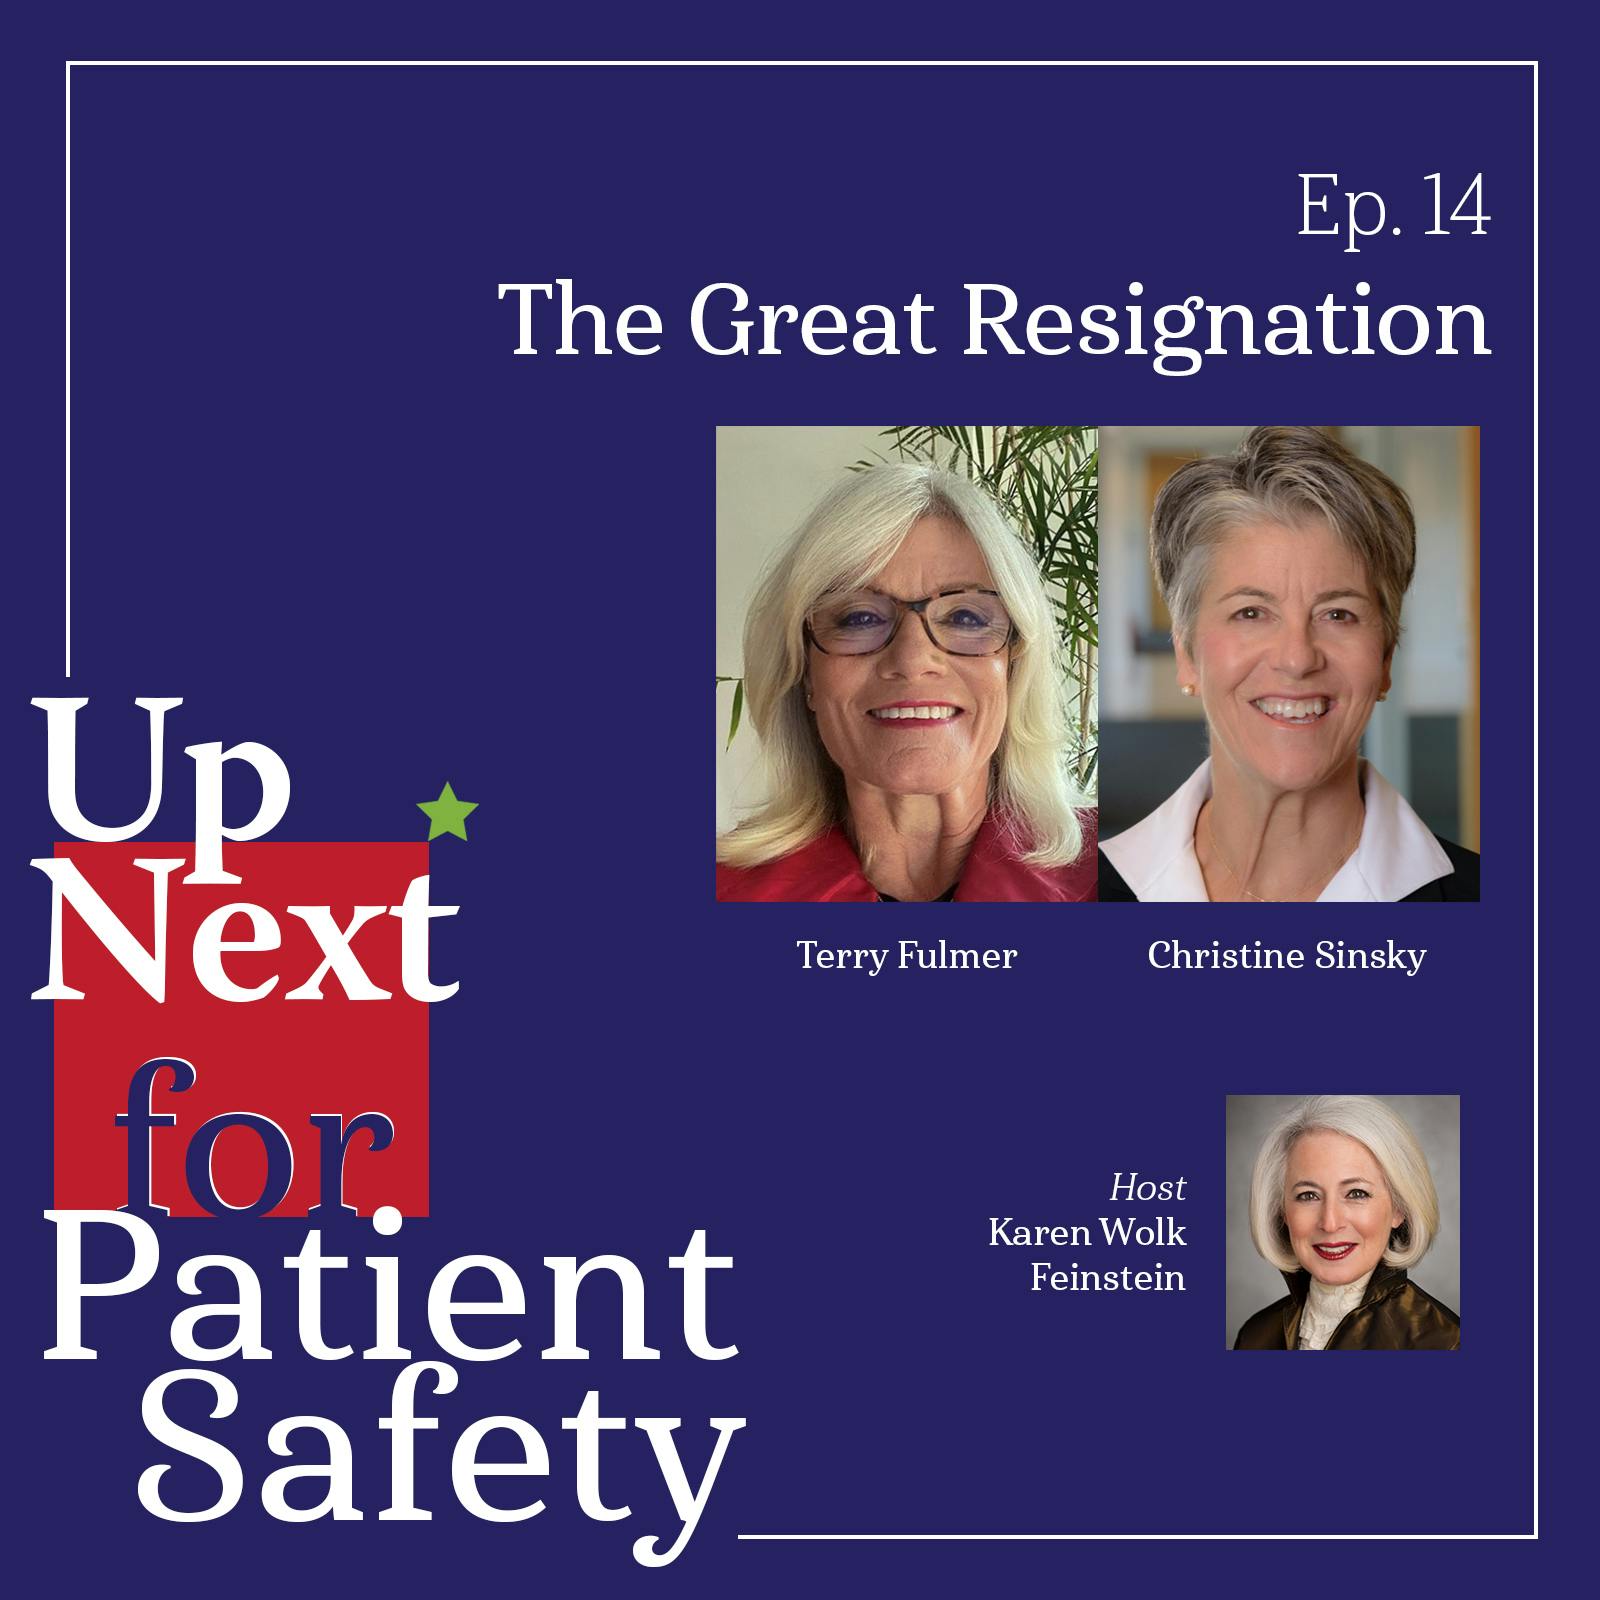 Up Next for Patient Safety: The Great Resignation